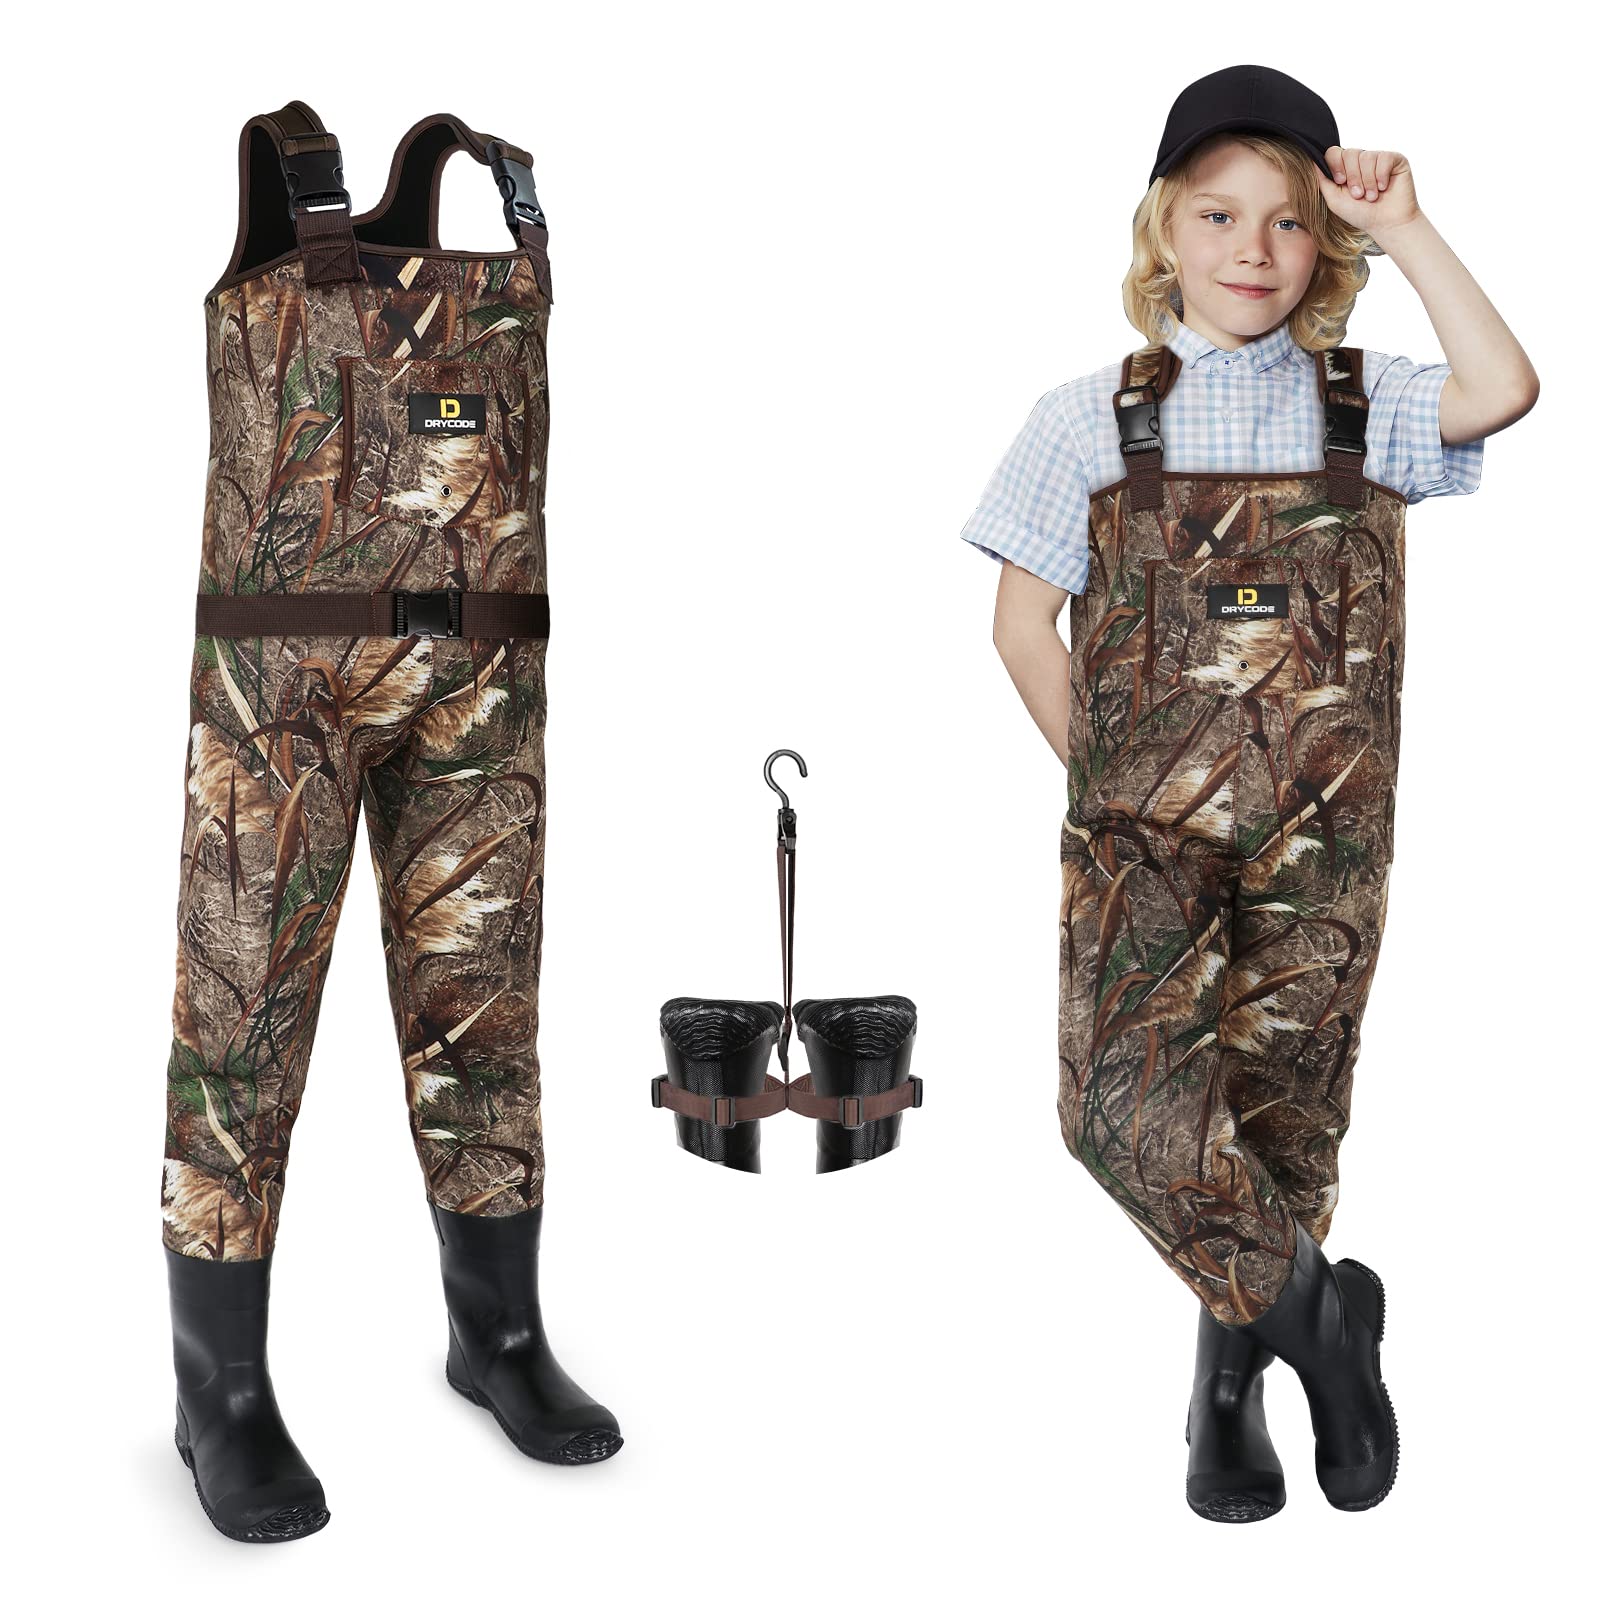 DRYCODE Kids Waders with Insulated Boots, Youth Waders for Toddler